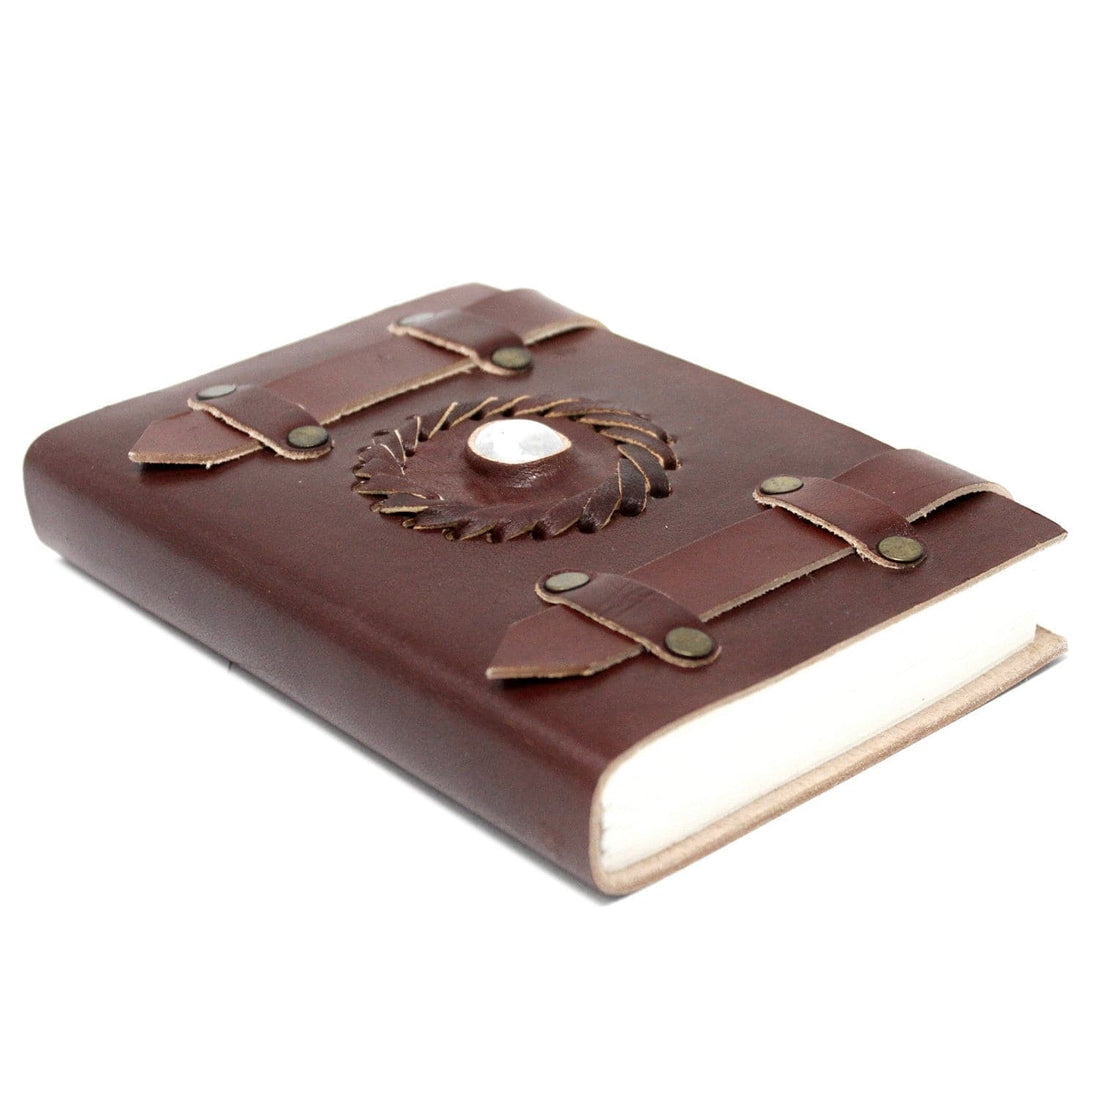 Leather Moonstone with Belts Notebook 15x10 cm - best price from Maltashopper.com LBN-16